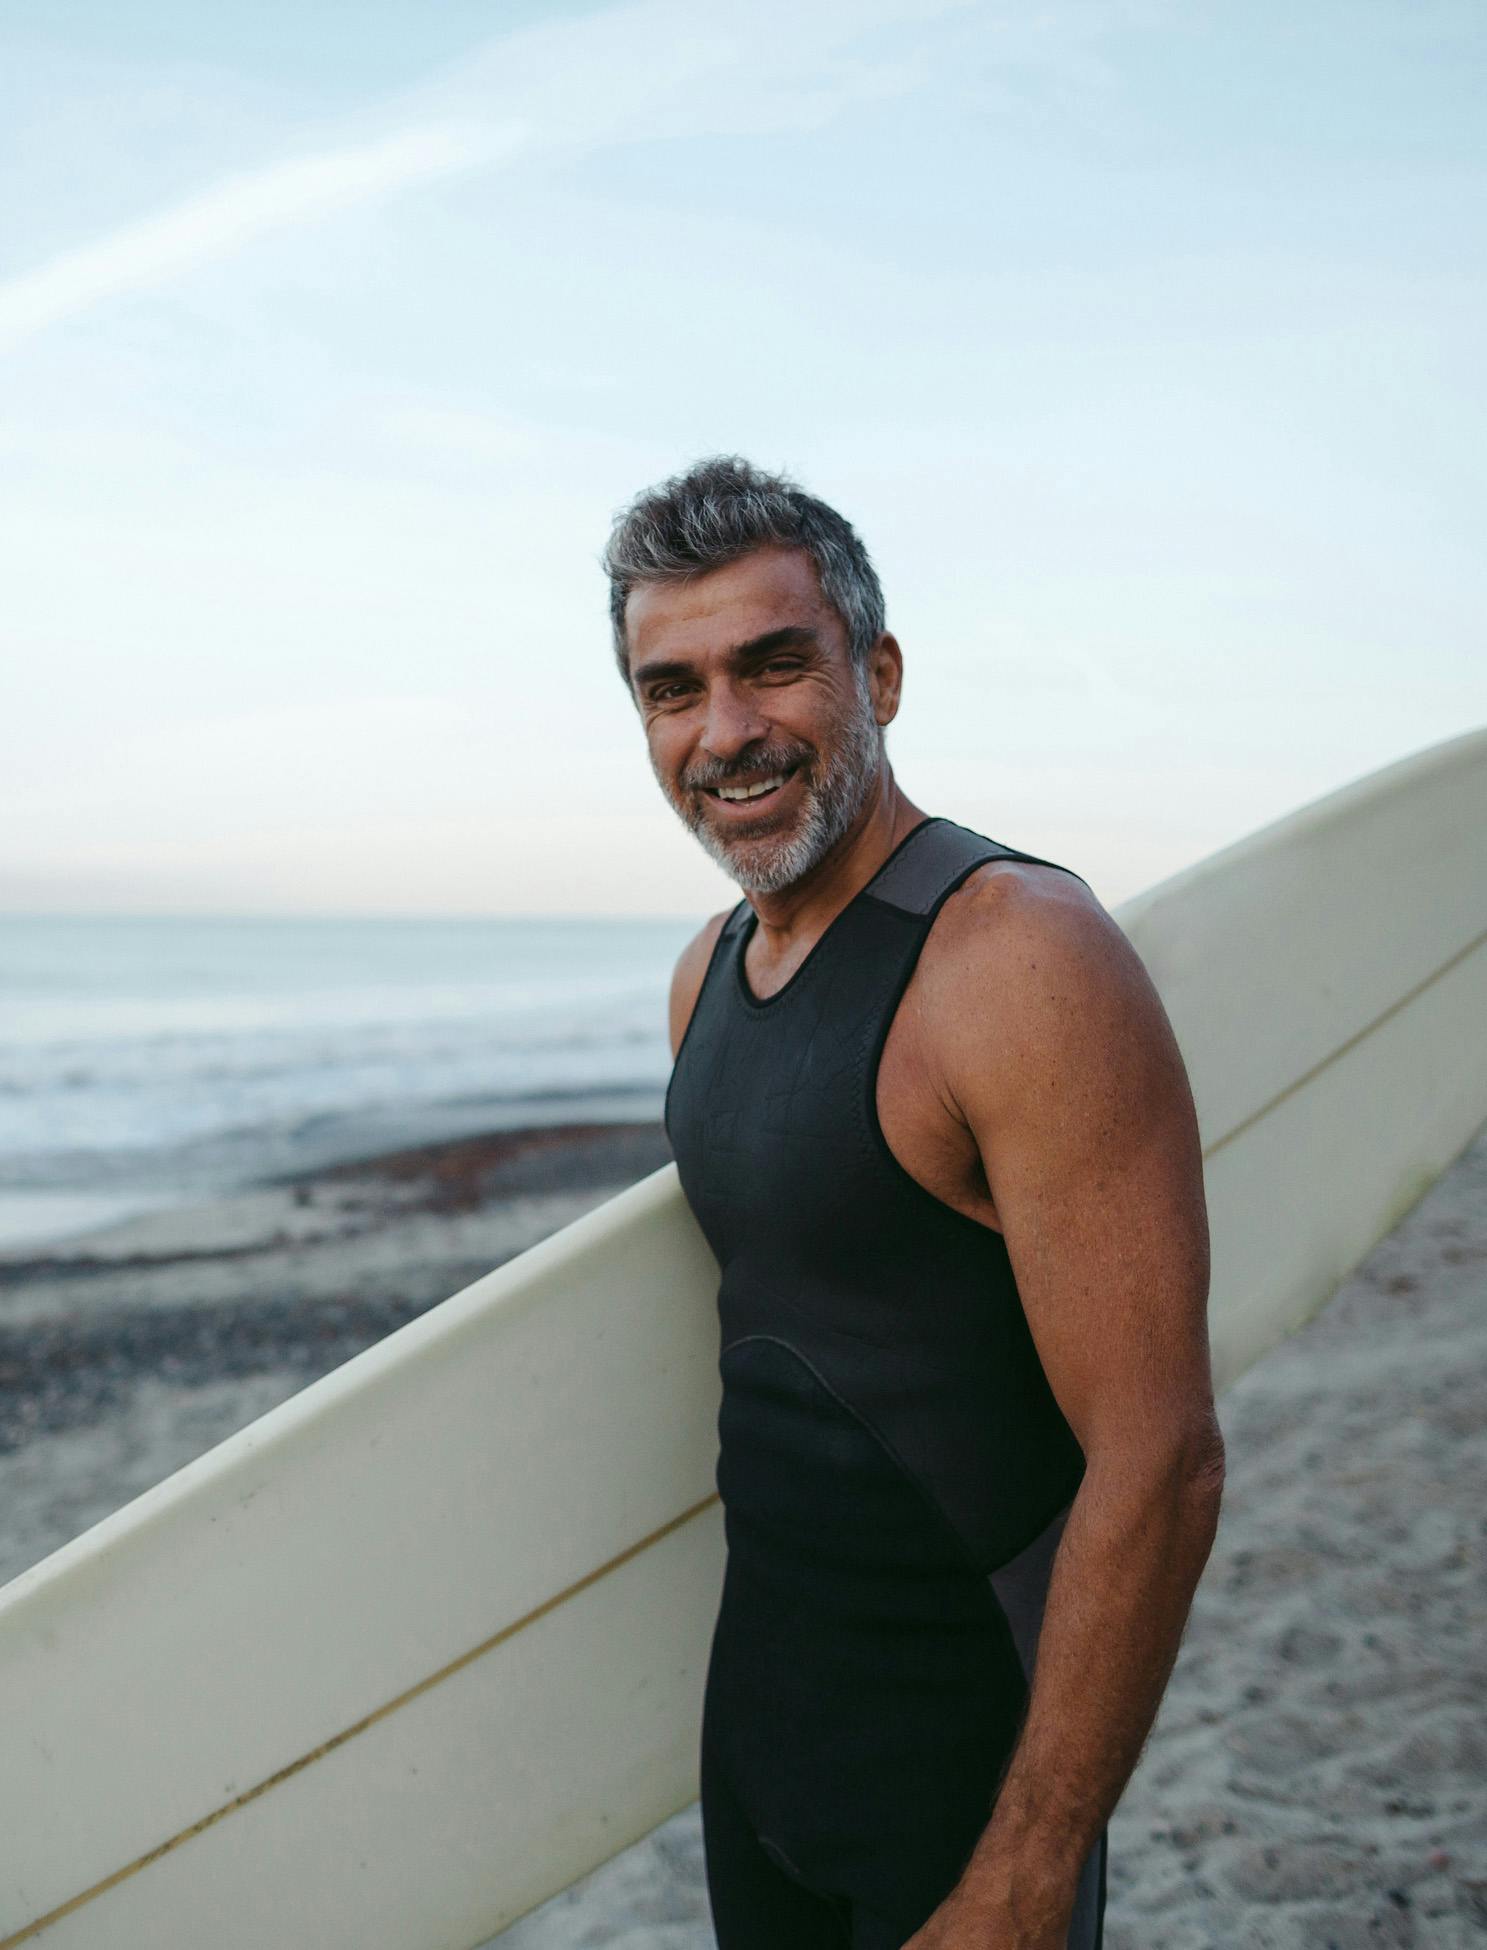 Man on beach smiling at camera, holding surfboard